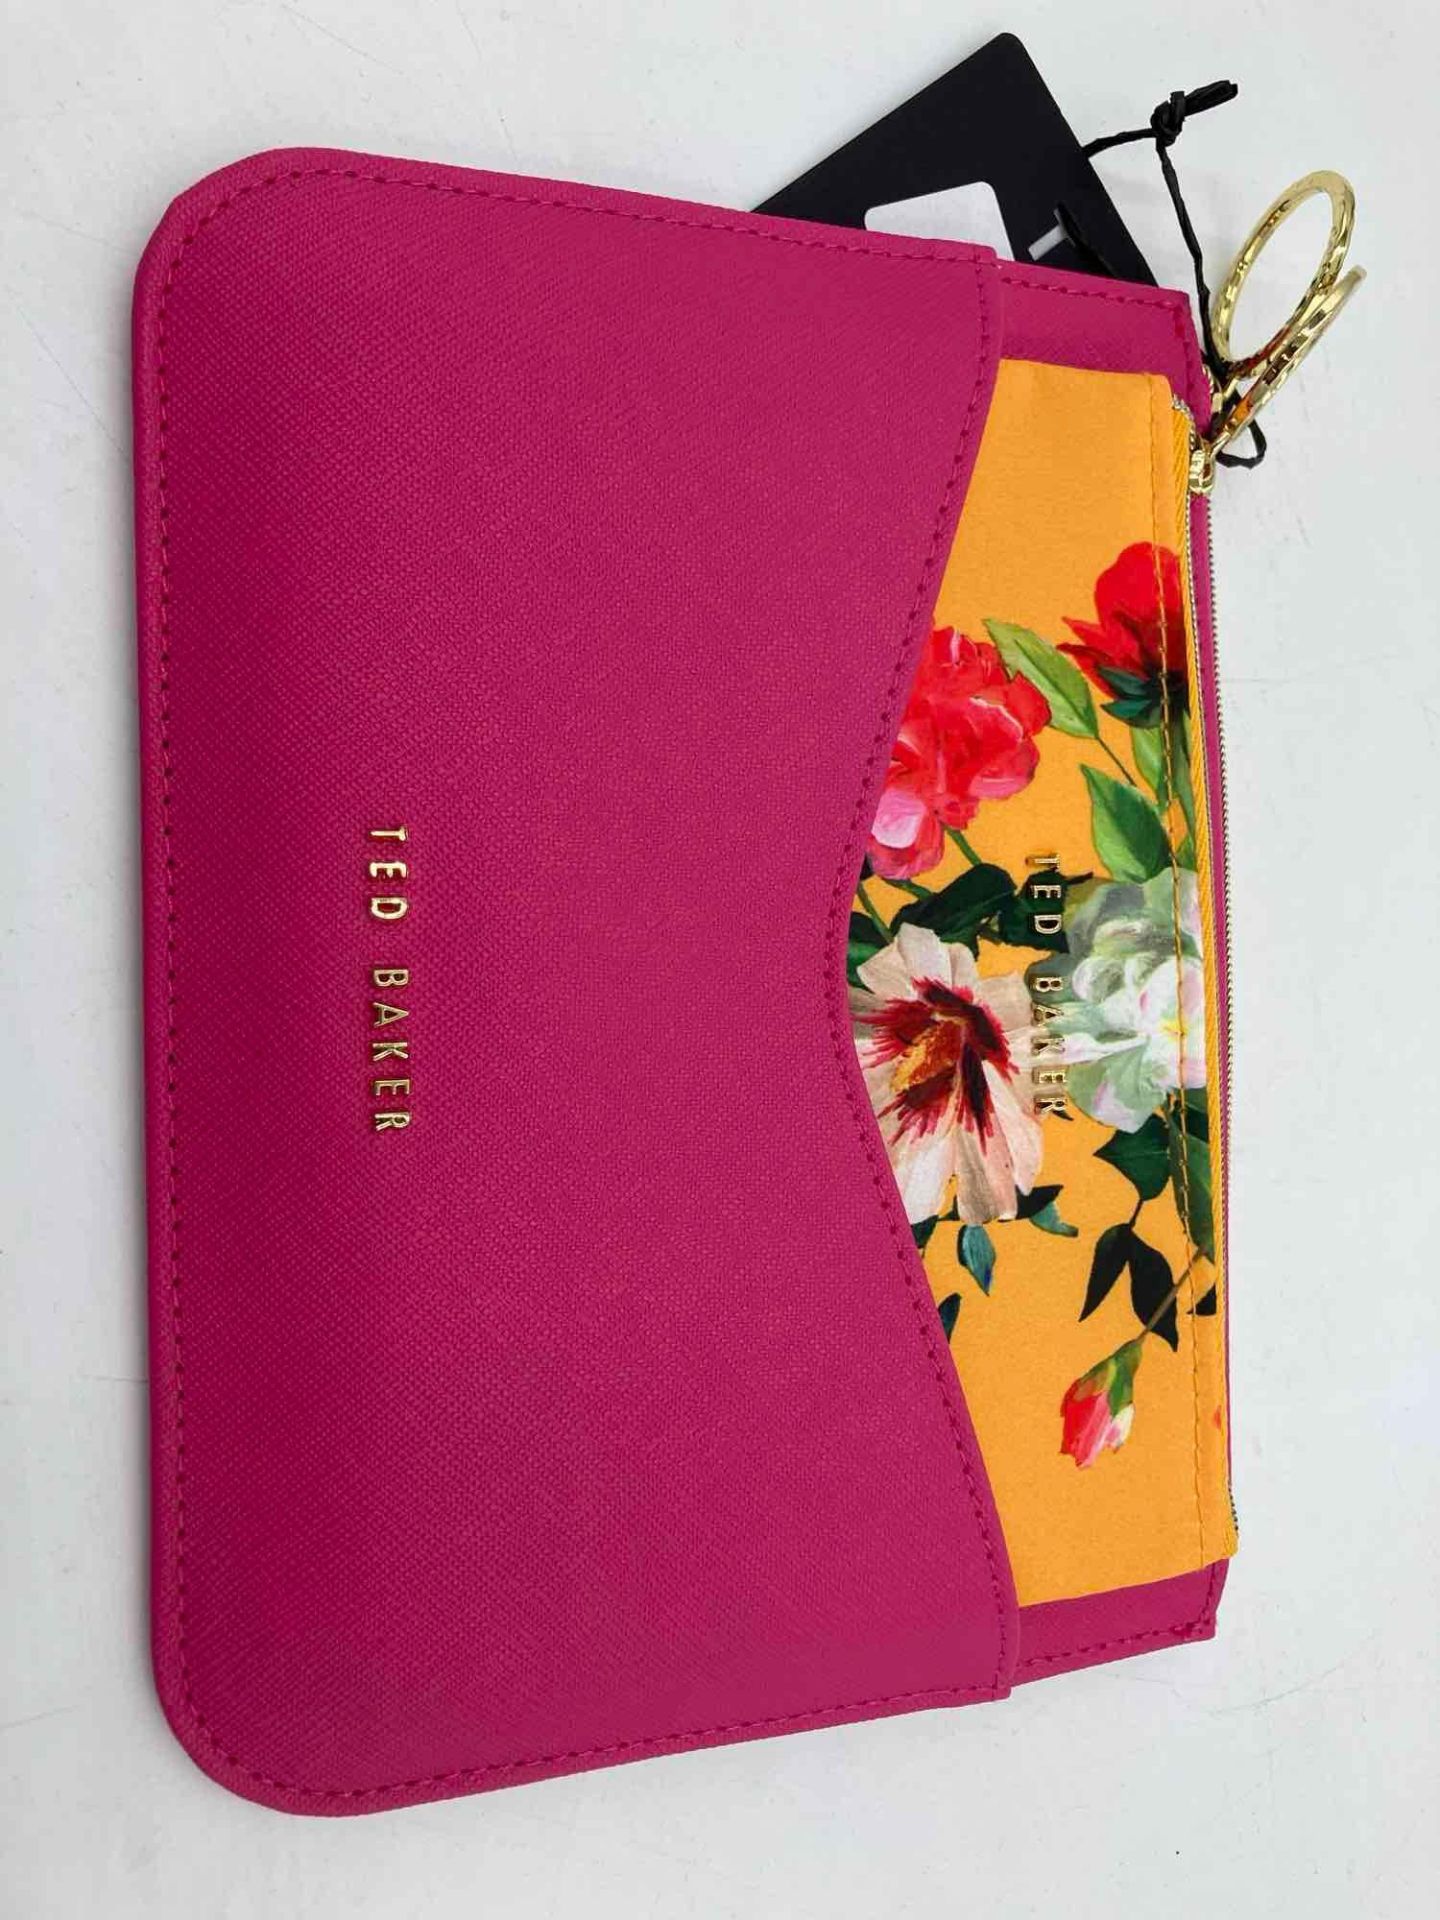 TED BAKER BEAUTY BAG DUO - 9718 - Image 3 of 4